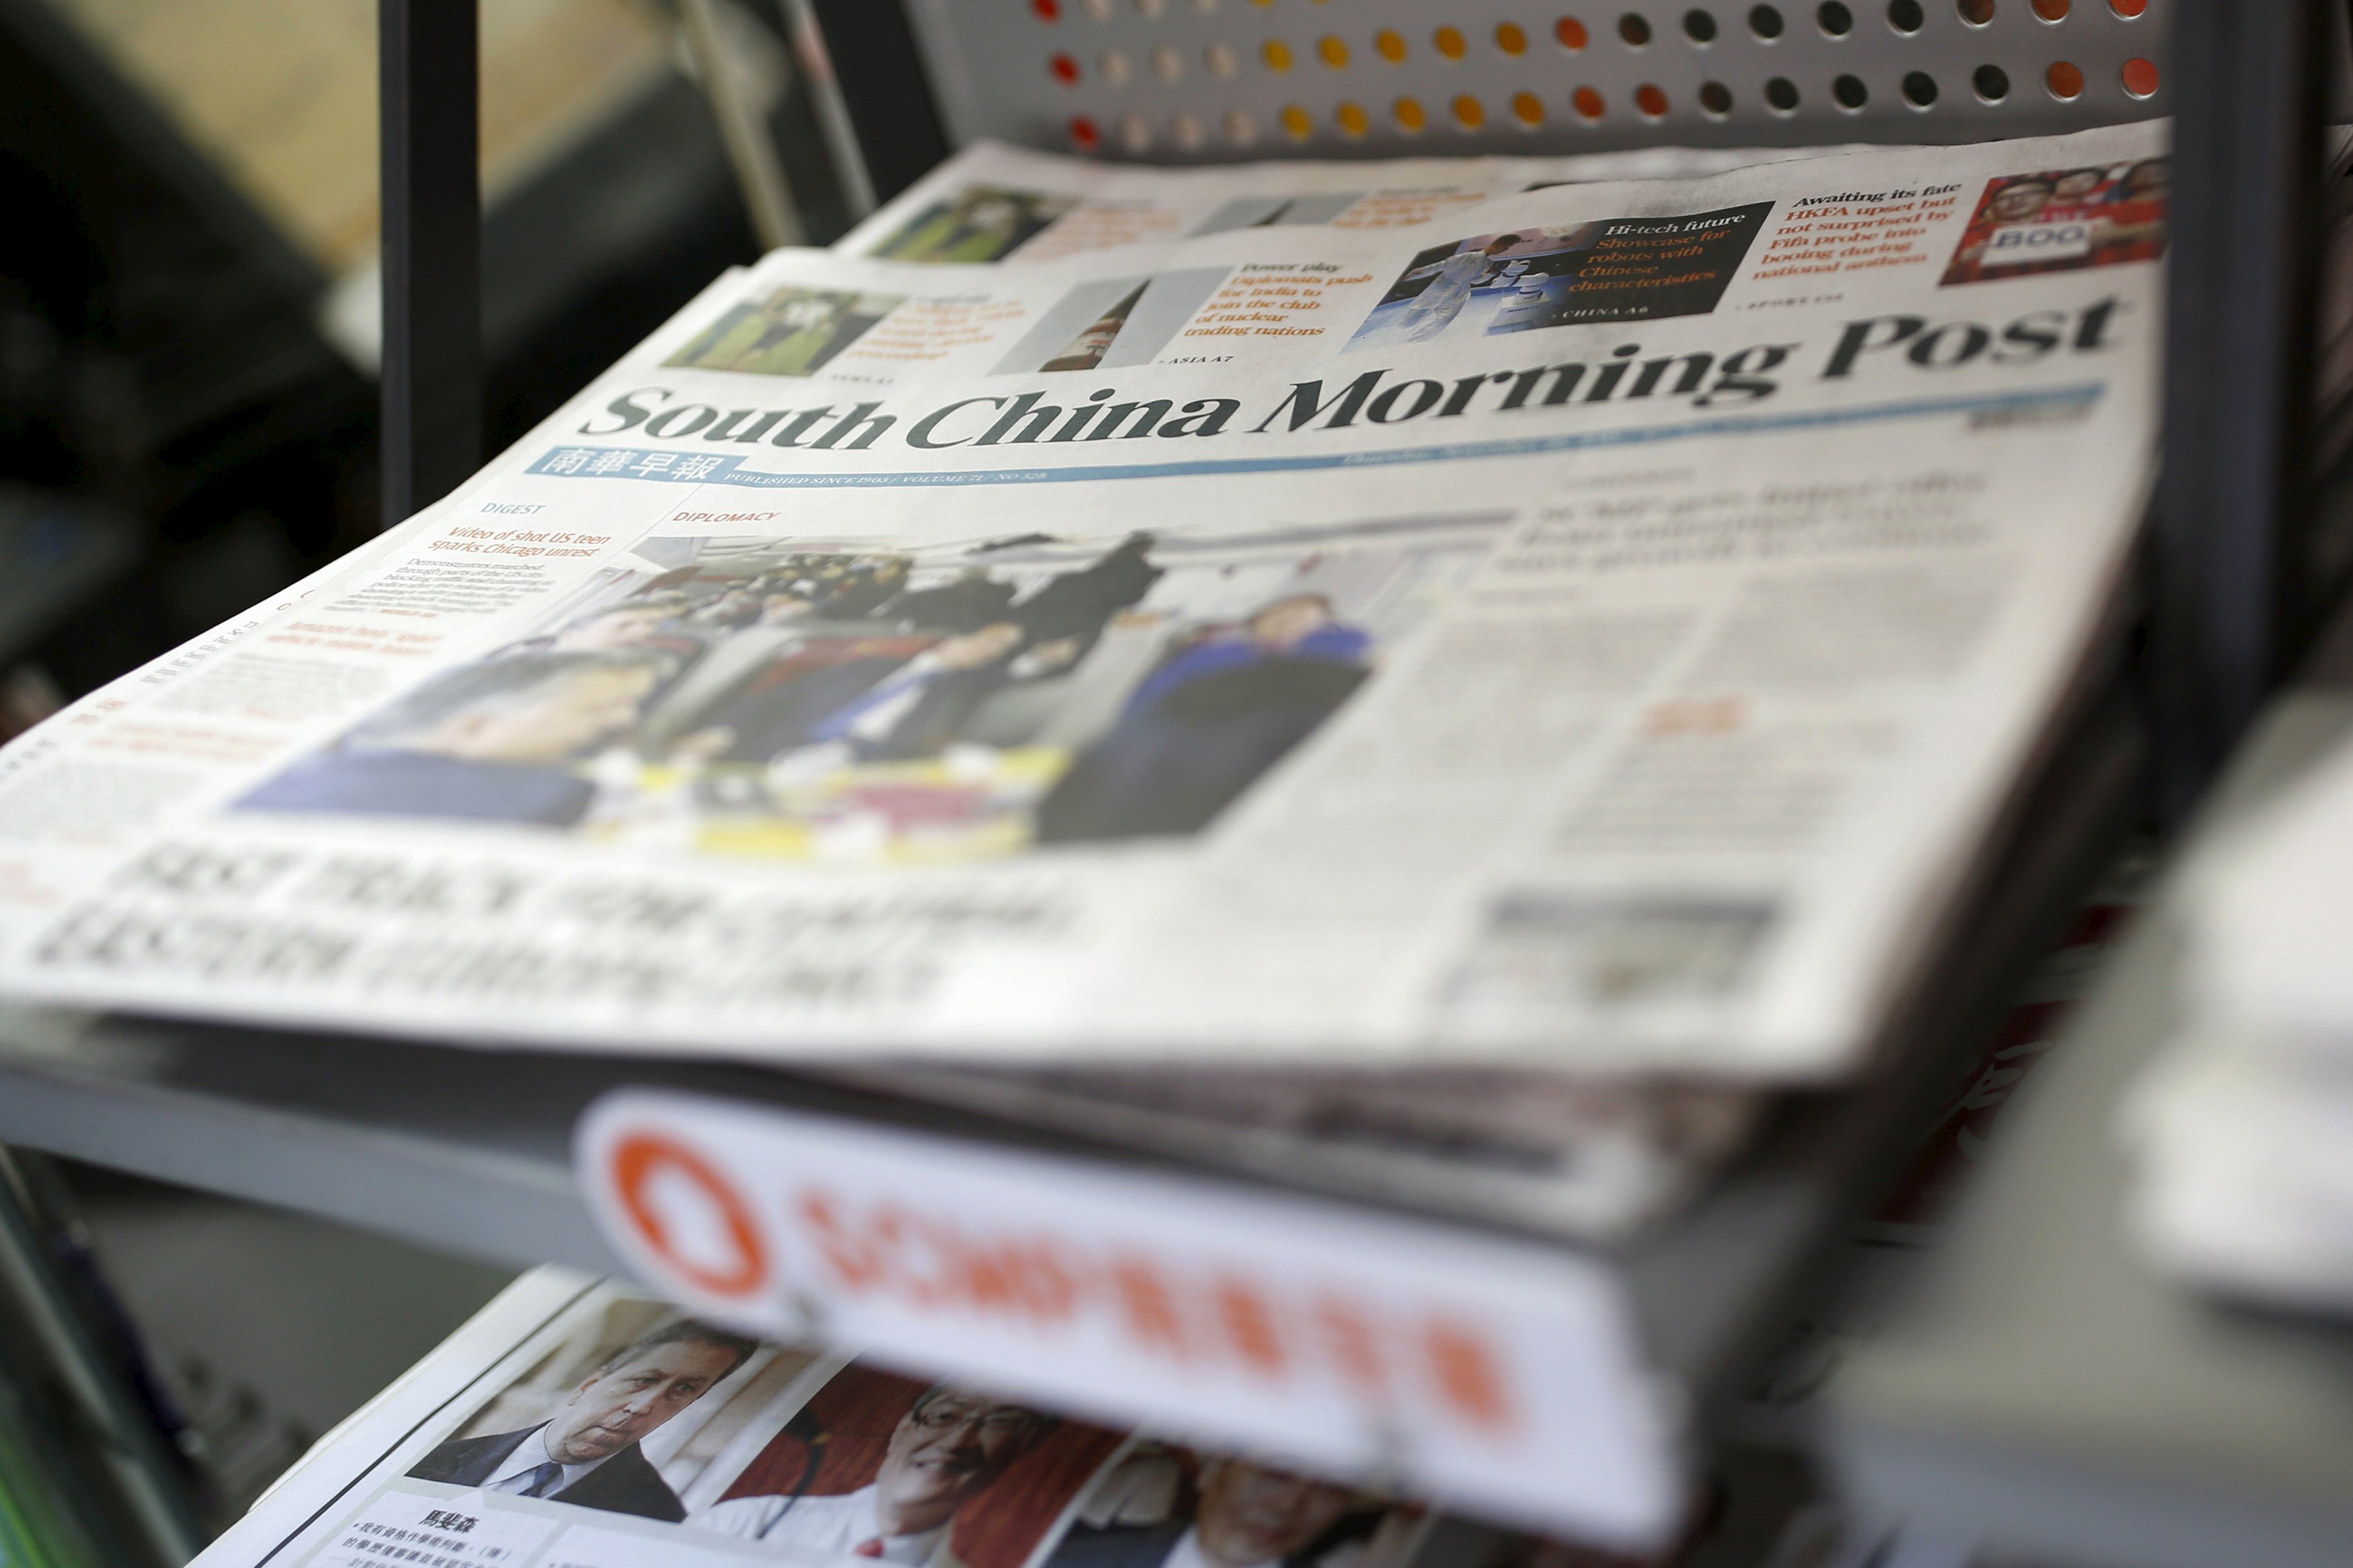 Copies of the South China Morning Post (SCMP) newspaper are seen on a newspaper stand in Hong Kong, China November 26, 2015. Chinese e-commerce titan Alibaba Group Holding Ltd has approached the publisher of Hong Kong's South China Morning Post newspaper to discuss buying its media assets, a source familiar with the matter said on Thursday. Photo: Reuters